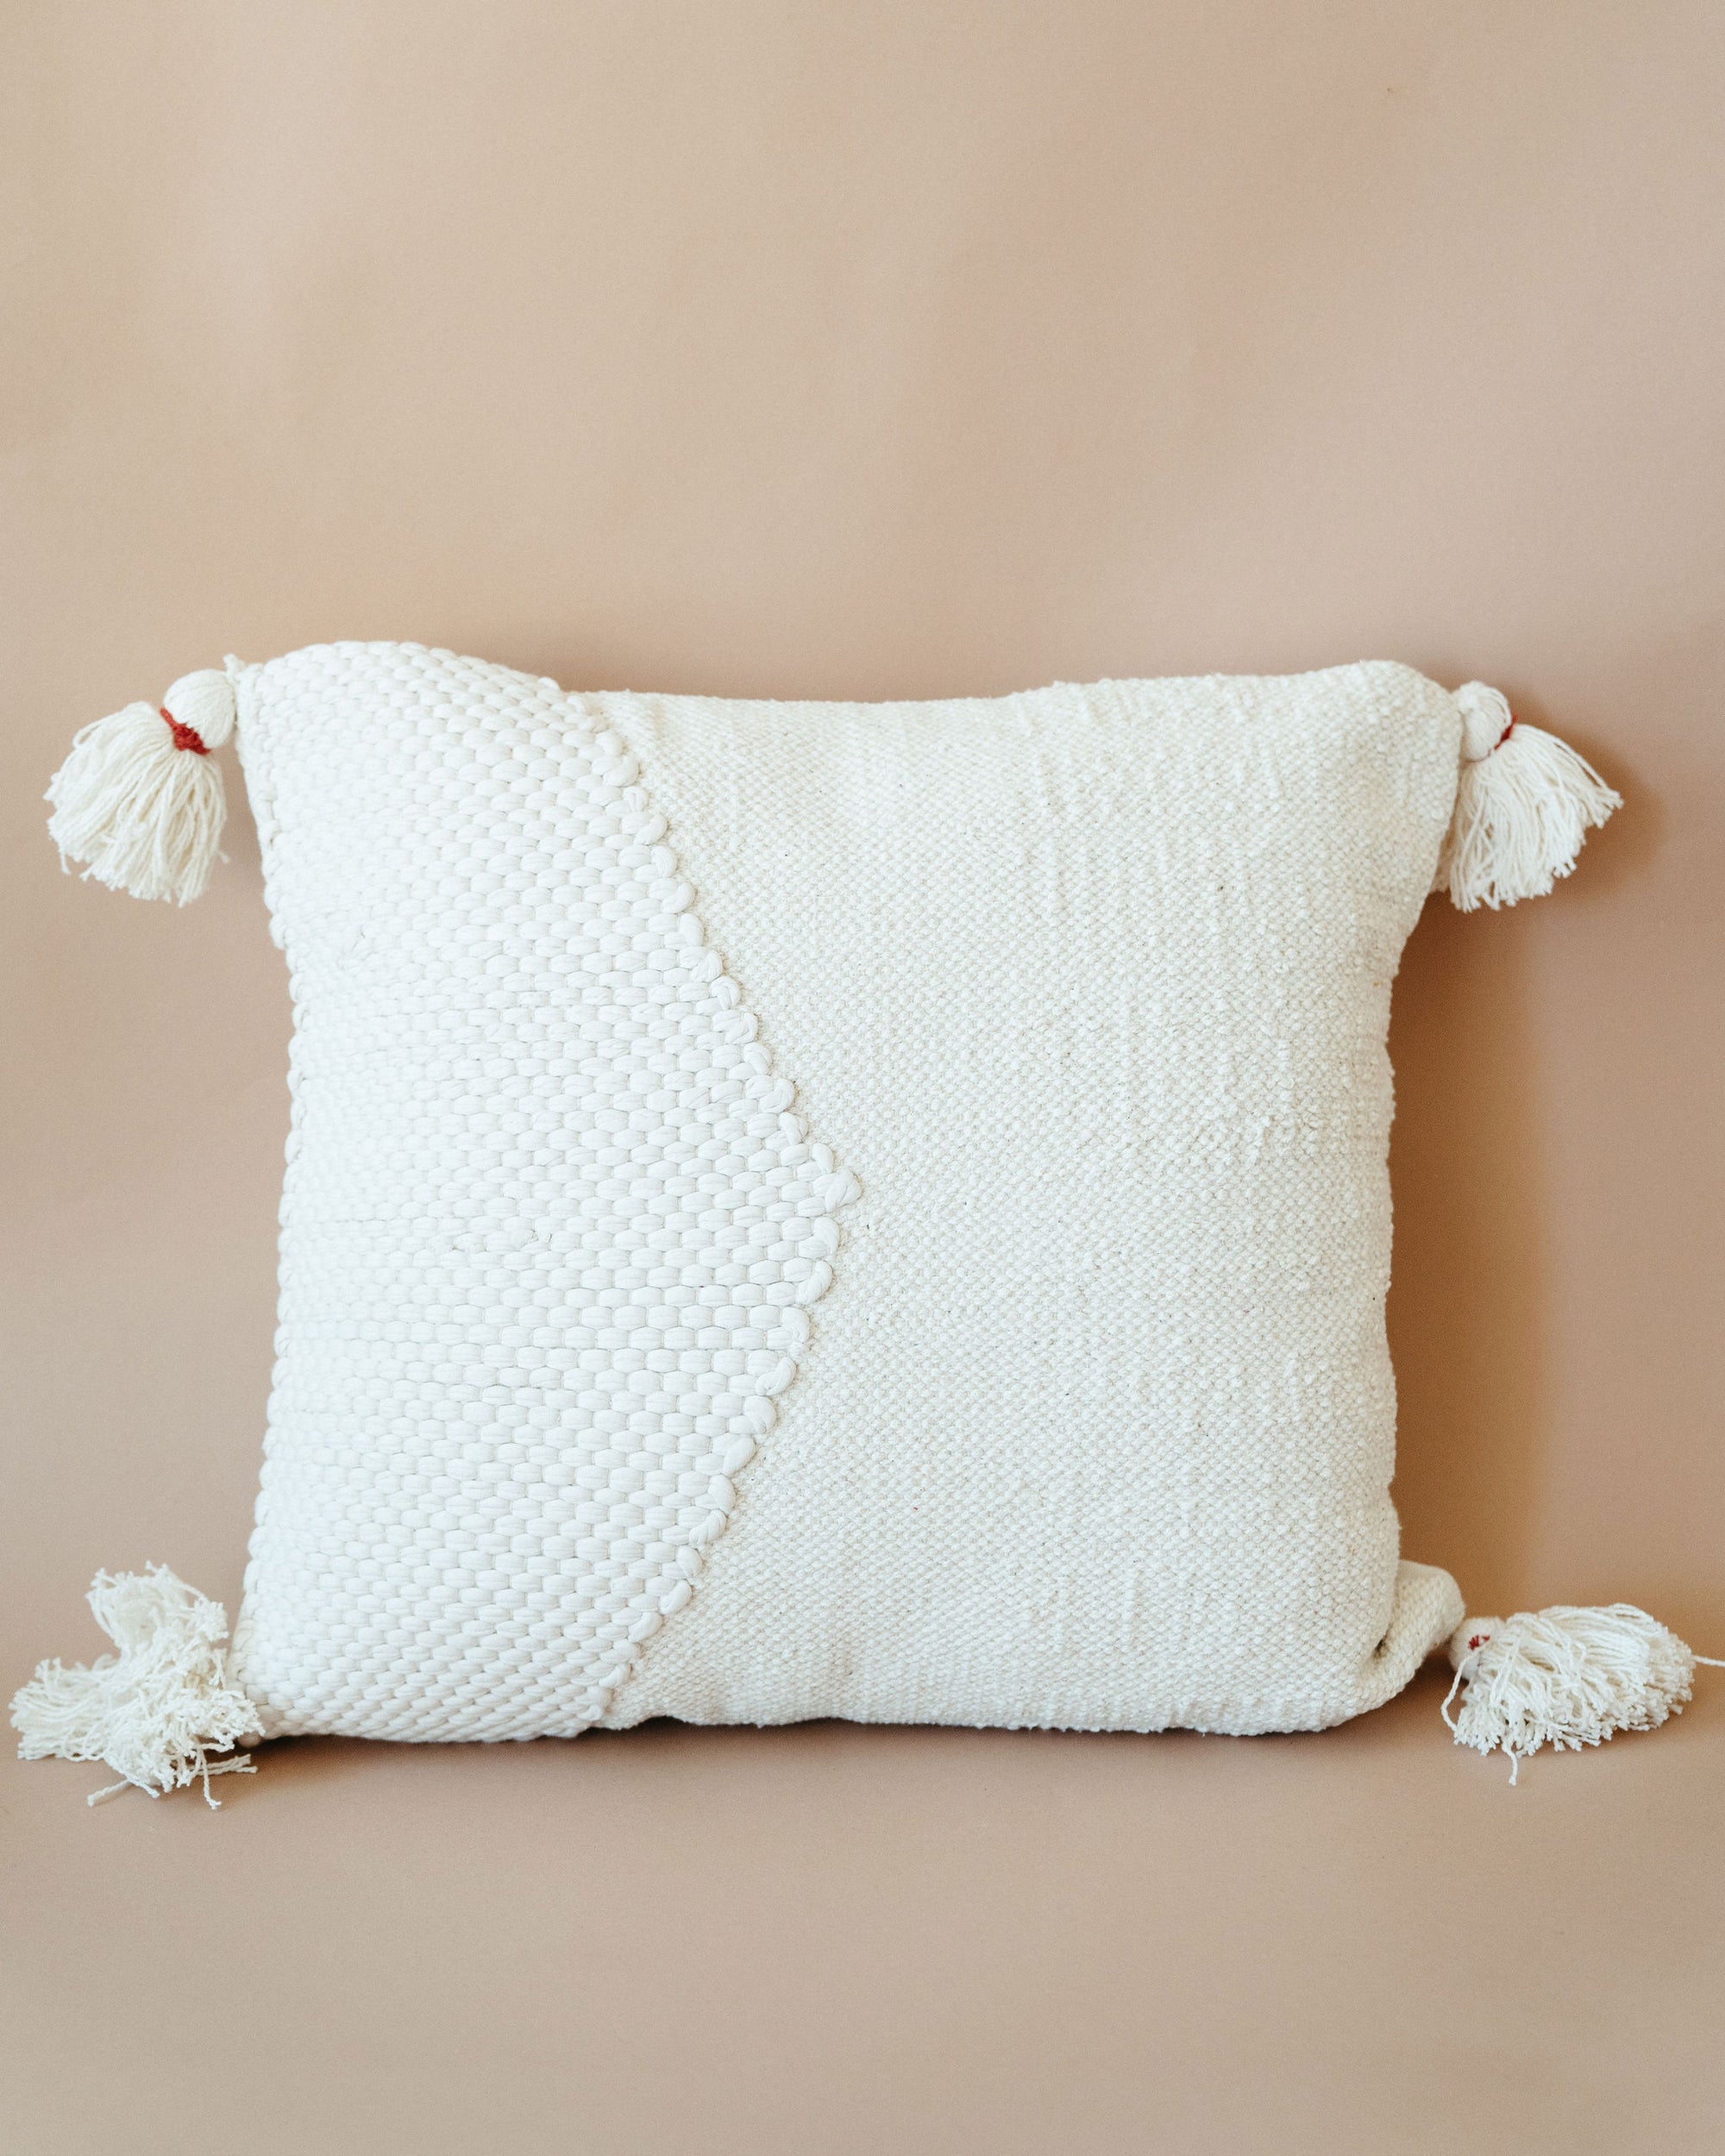 Cottage Handwoven Pillow